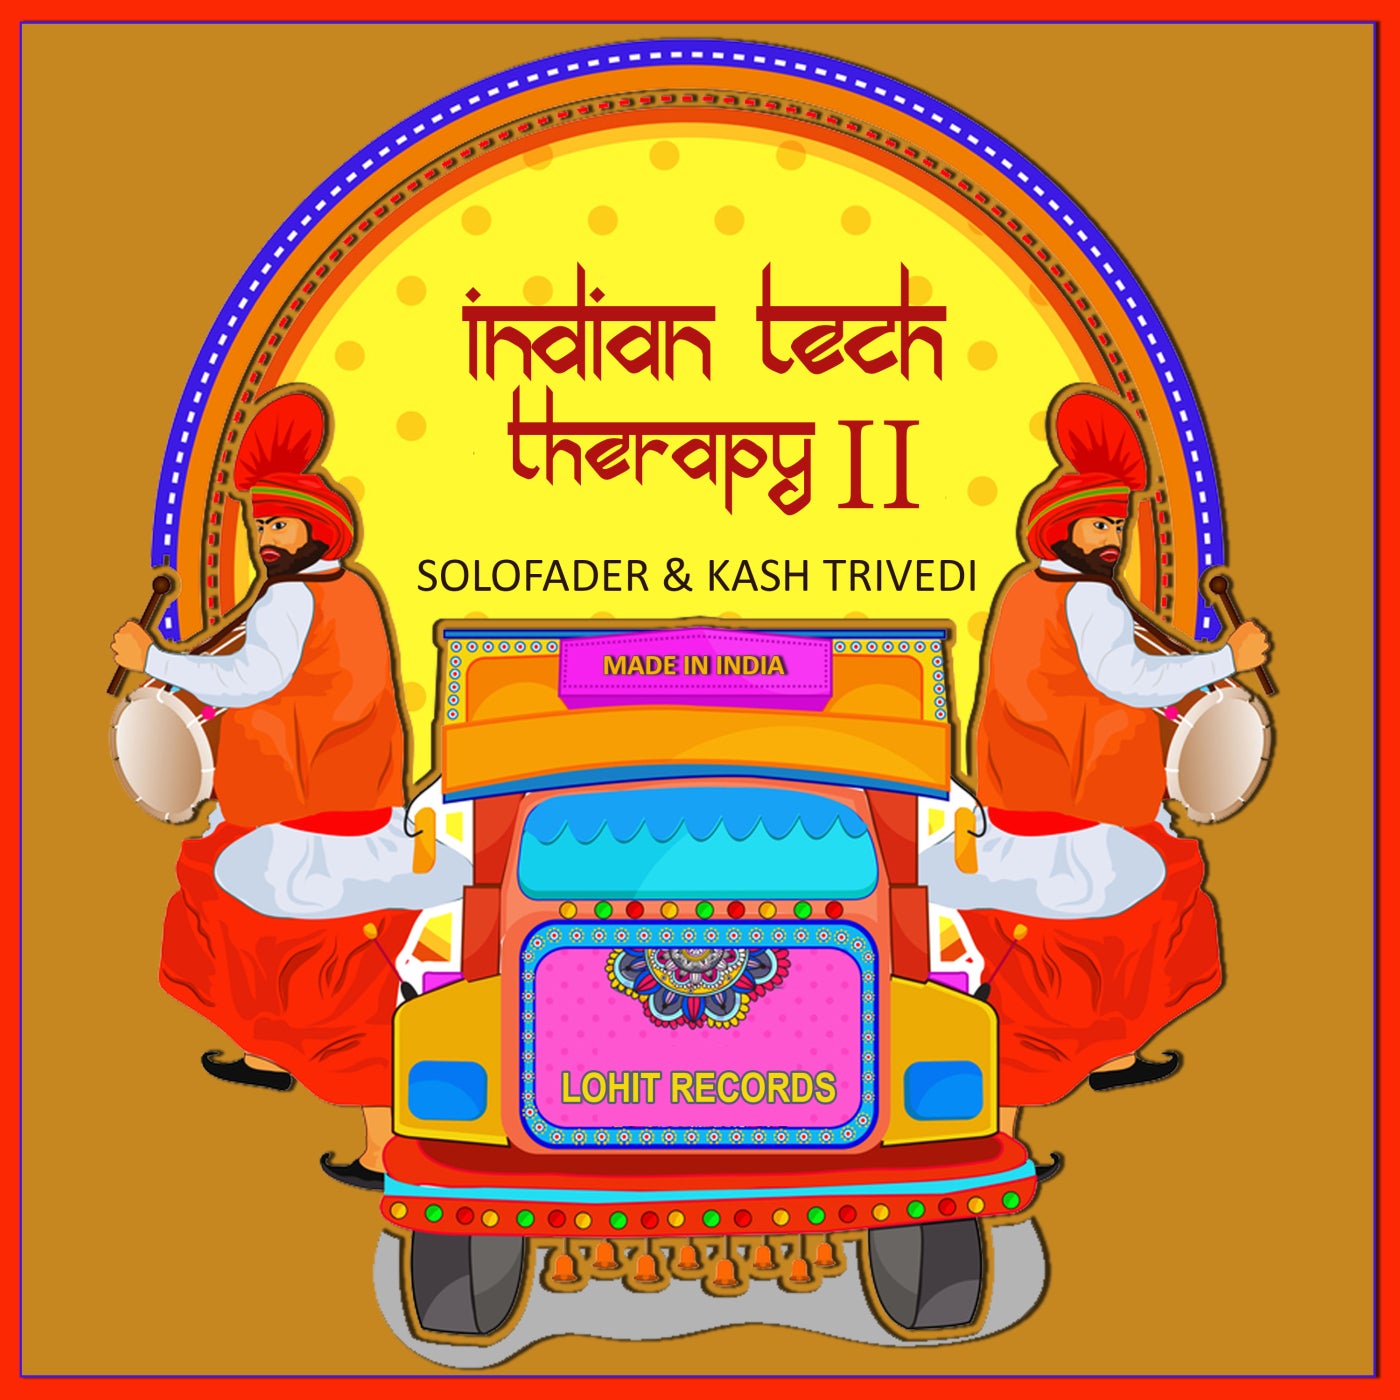 Indian Tech Therapy - II